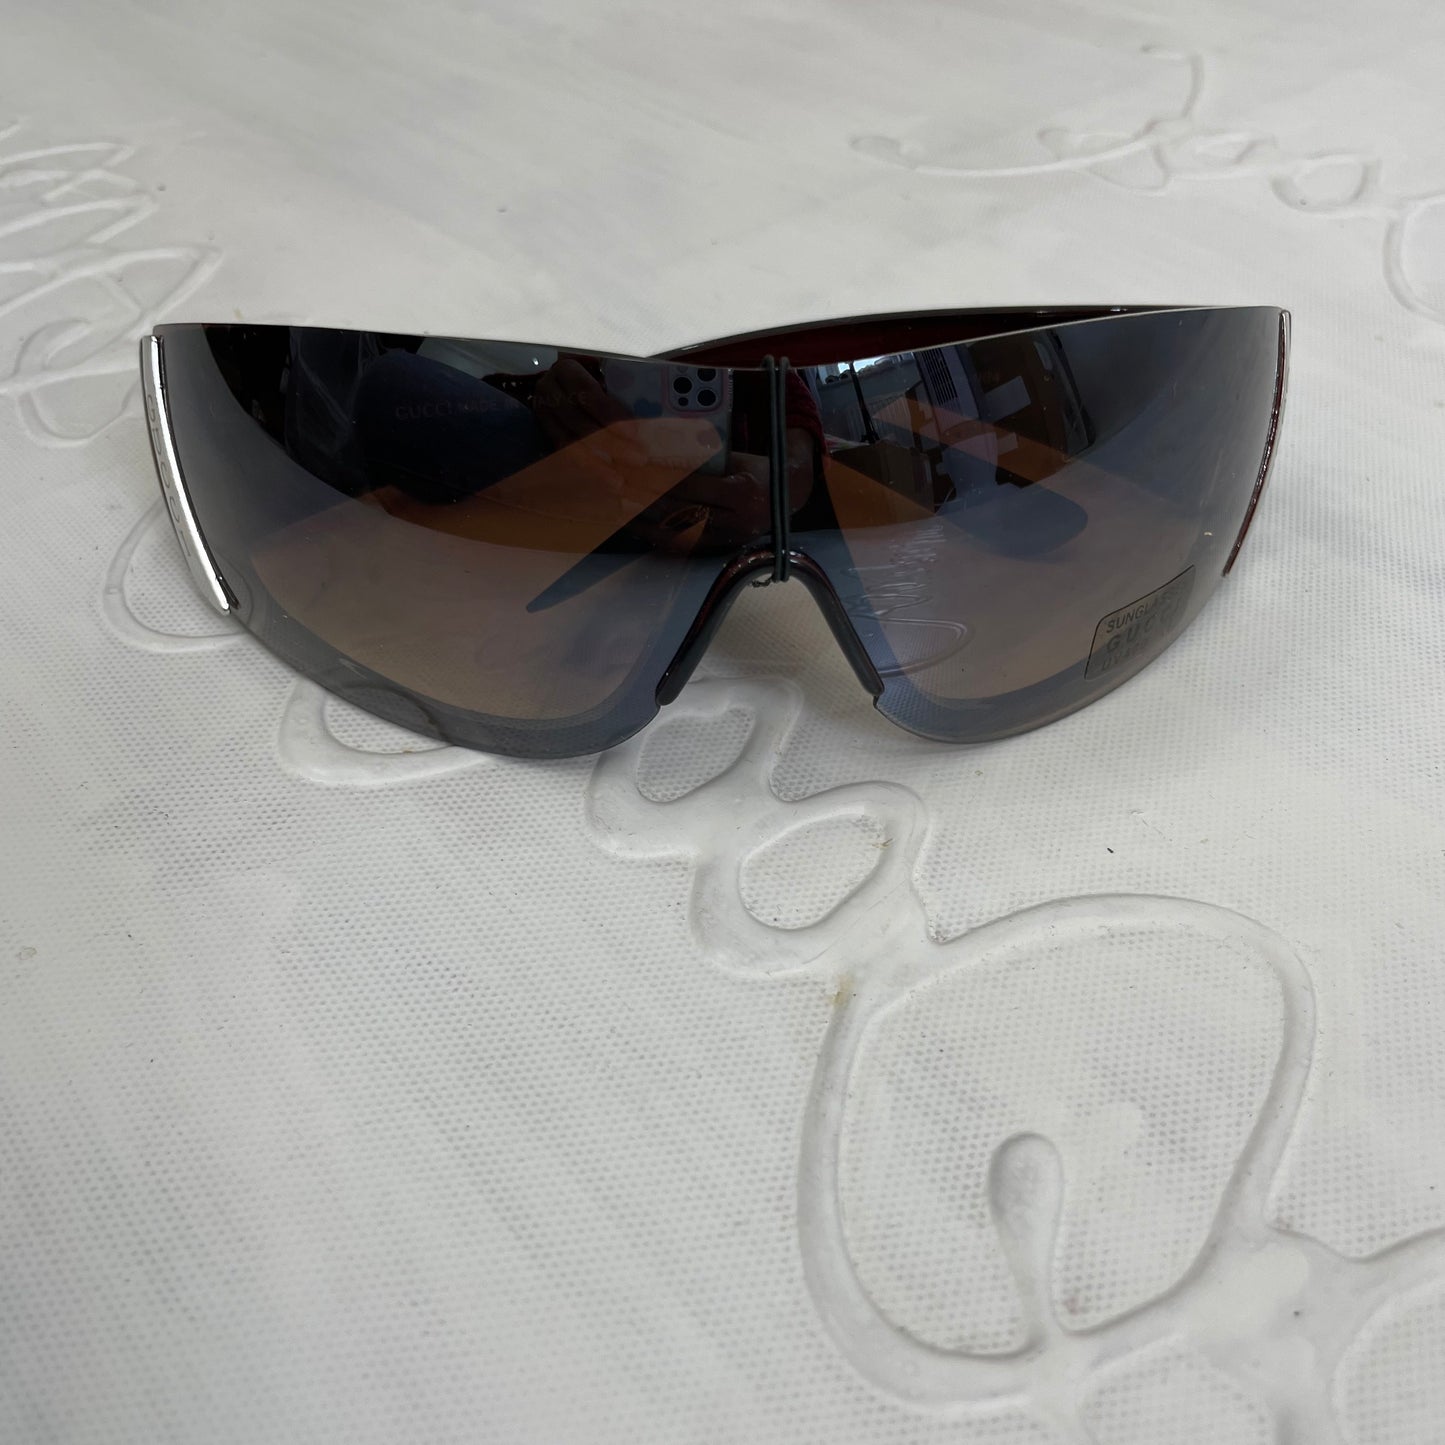 EUROPEAN SUMMER DROP | gucci style green tint sunglasses in brown